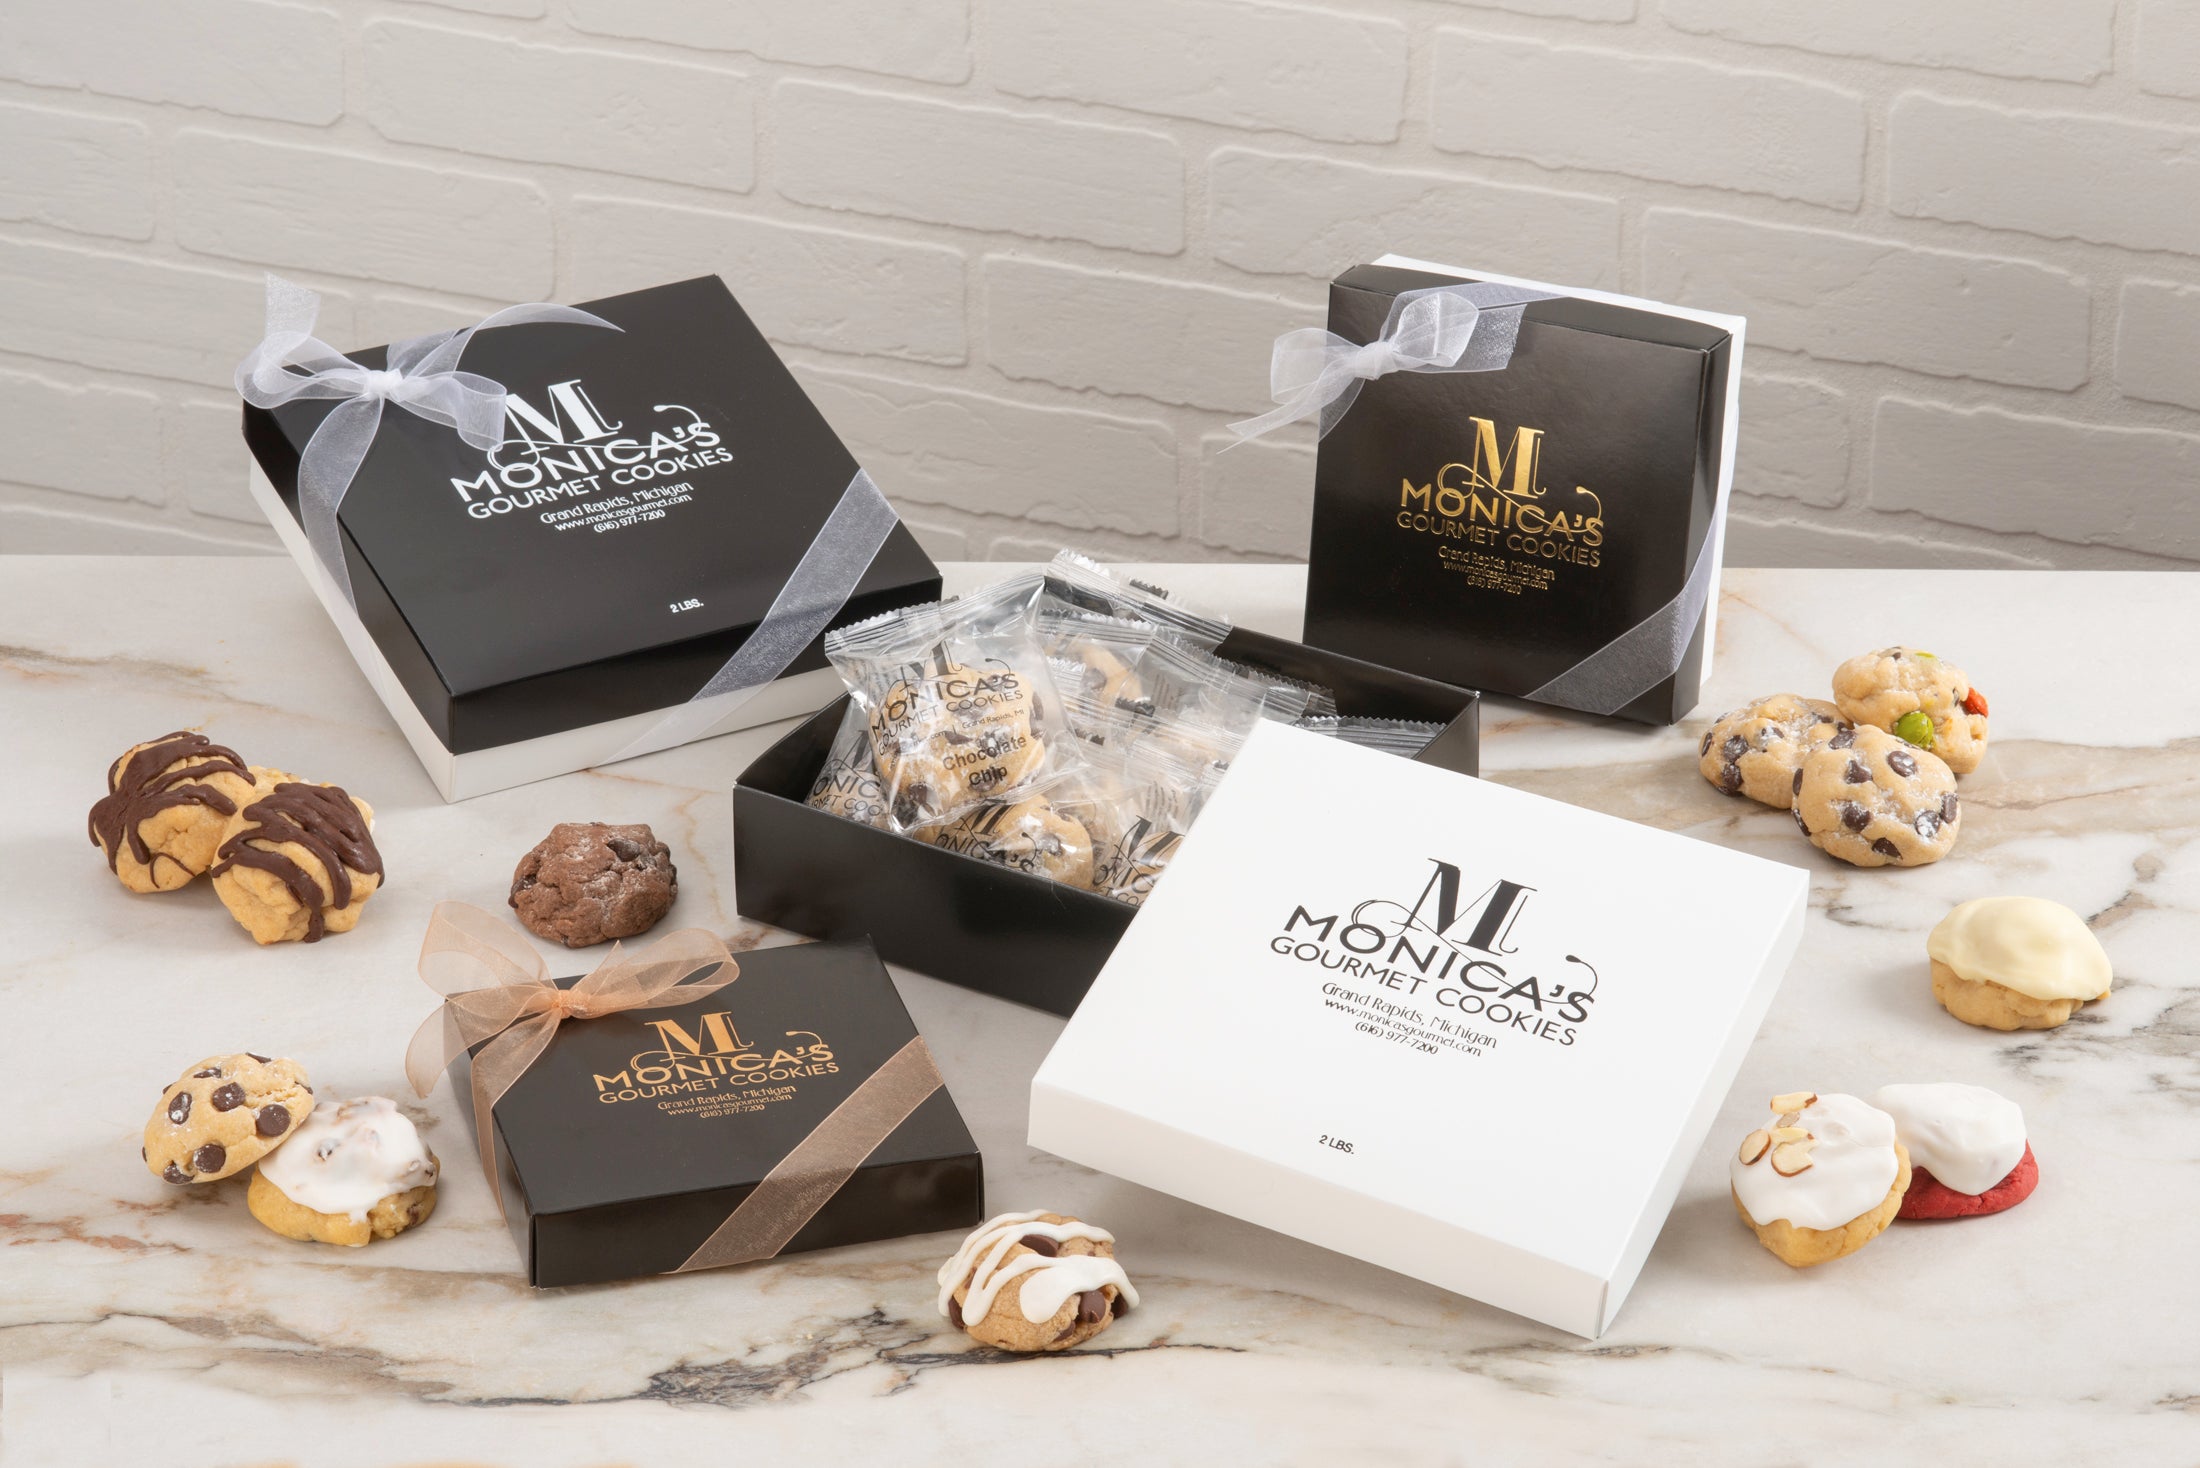 Gift boxes and cookies.